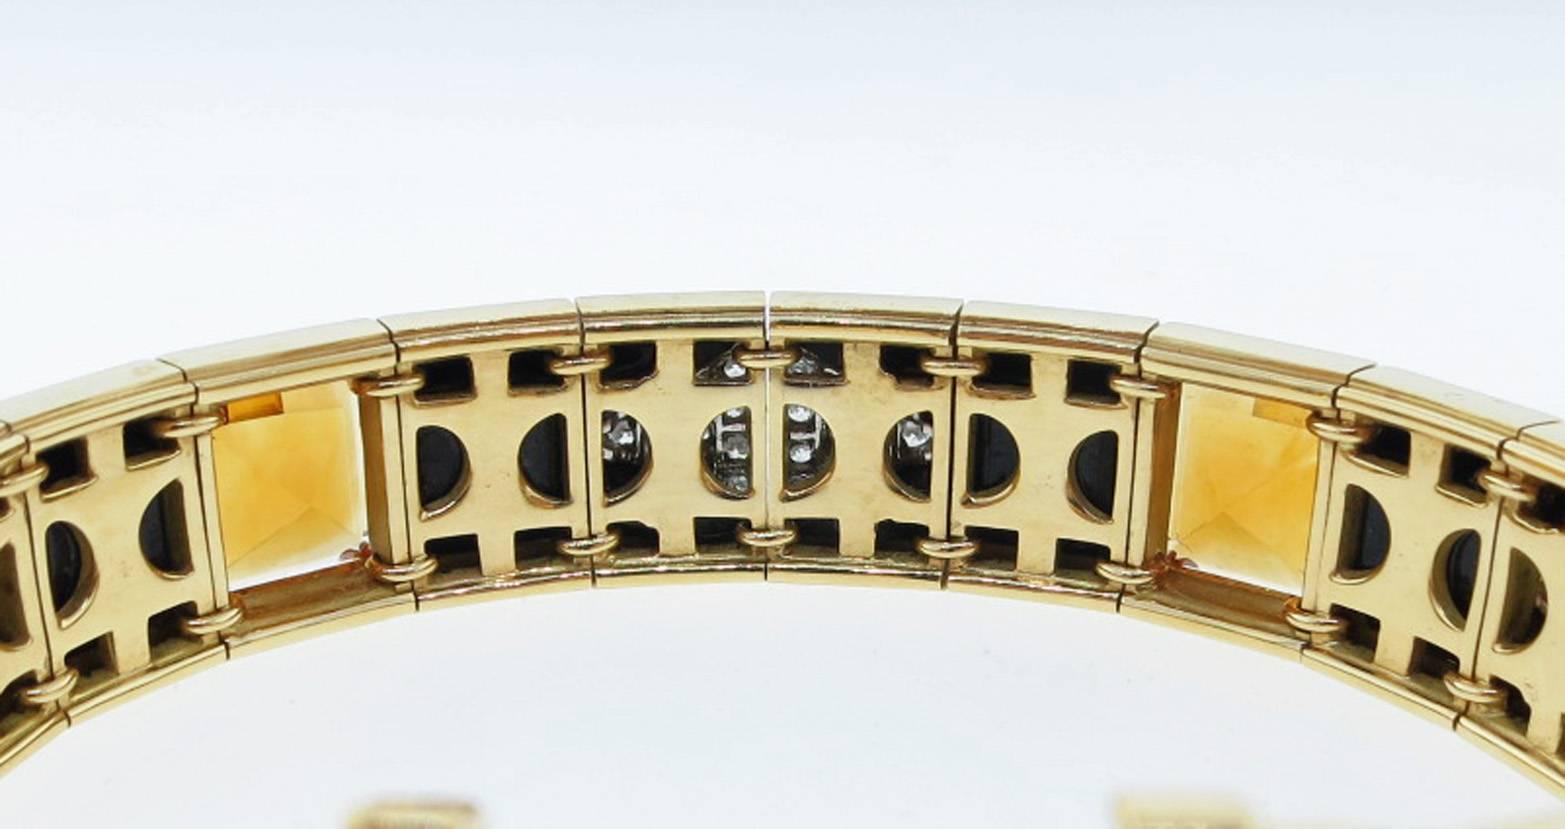 Dramatic and beautifully constructed 18kt. yellow gold and platinum bracelet made by Michael Bondanza . The bracelet is set with 4 sections of 4 onyx squares, 4 faceted golden citrines each weighing approx 3.5cts. and 4 platinum mounted marquise of